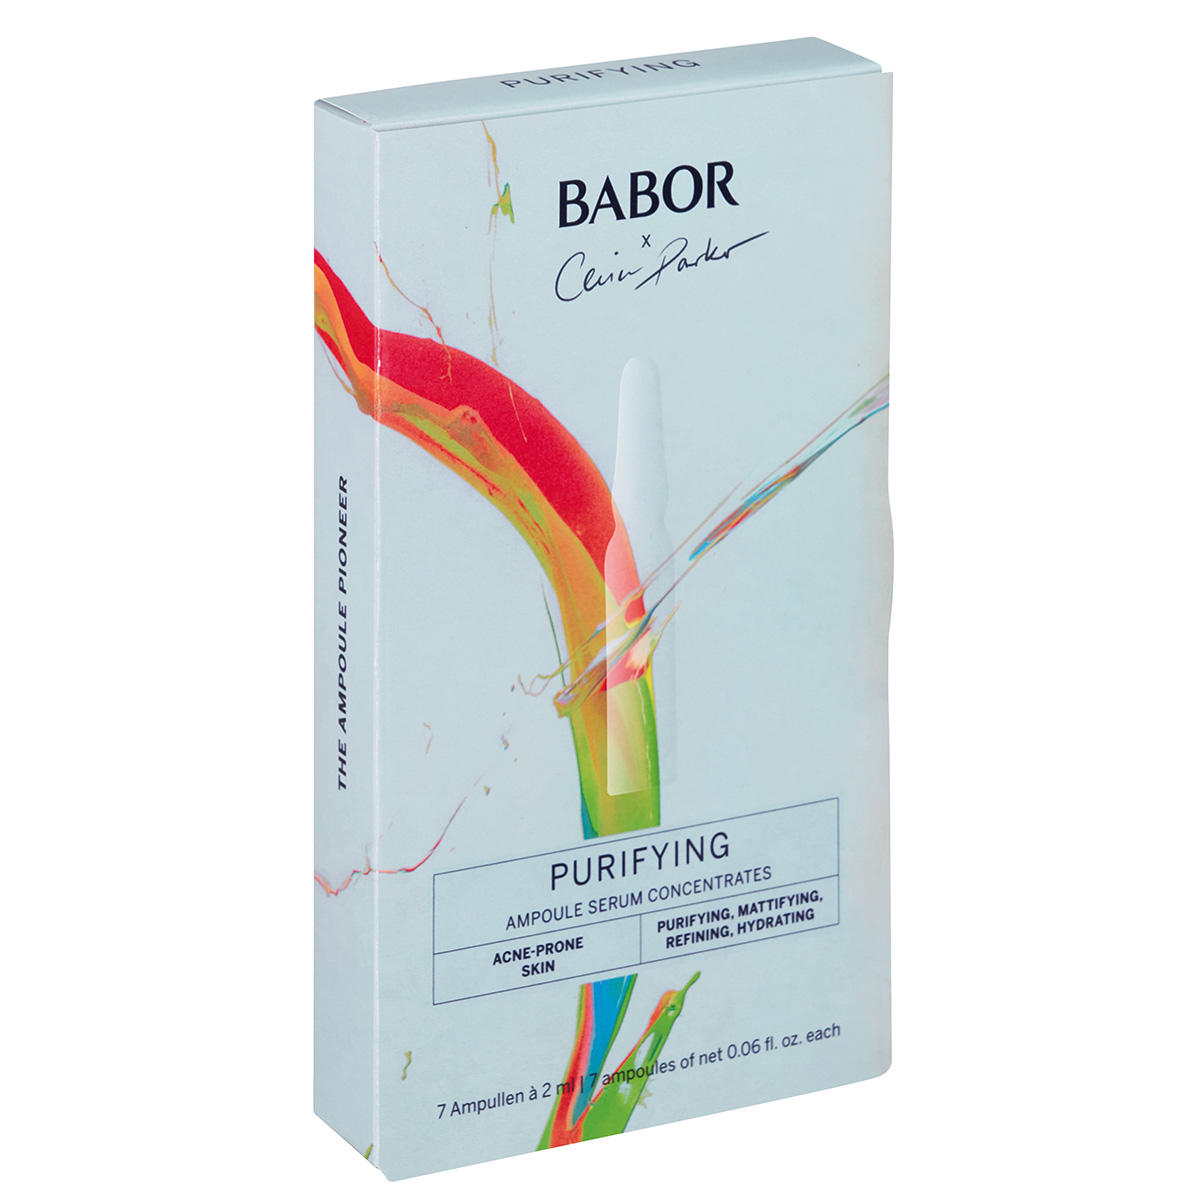 BABOR AMPOULE CONCENTRATES Purifying Ampoule Limited Edition 7 x 2 ml - 2